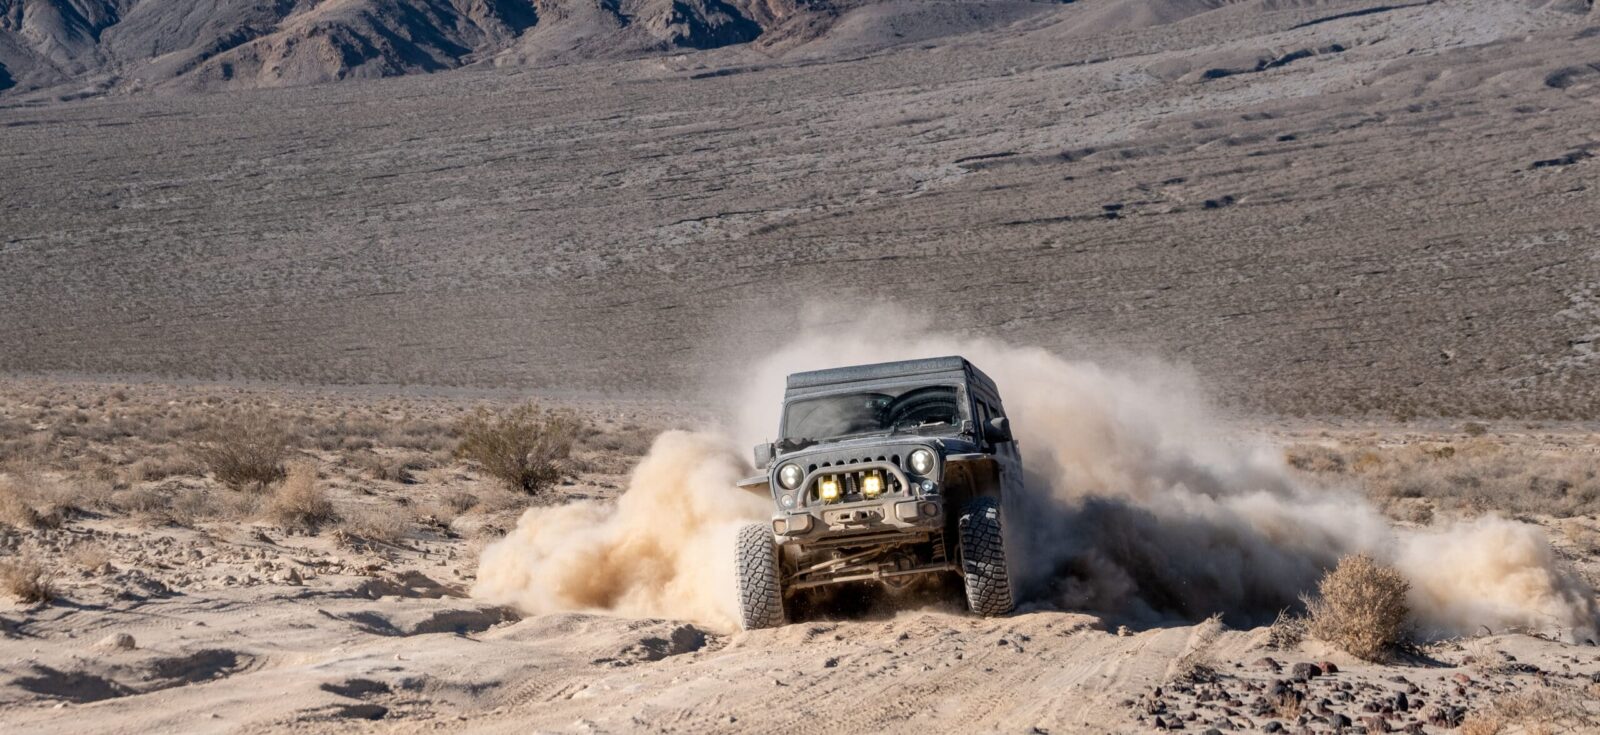 Jeep in Death Valley